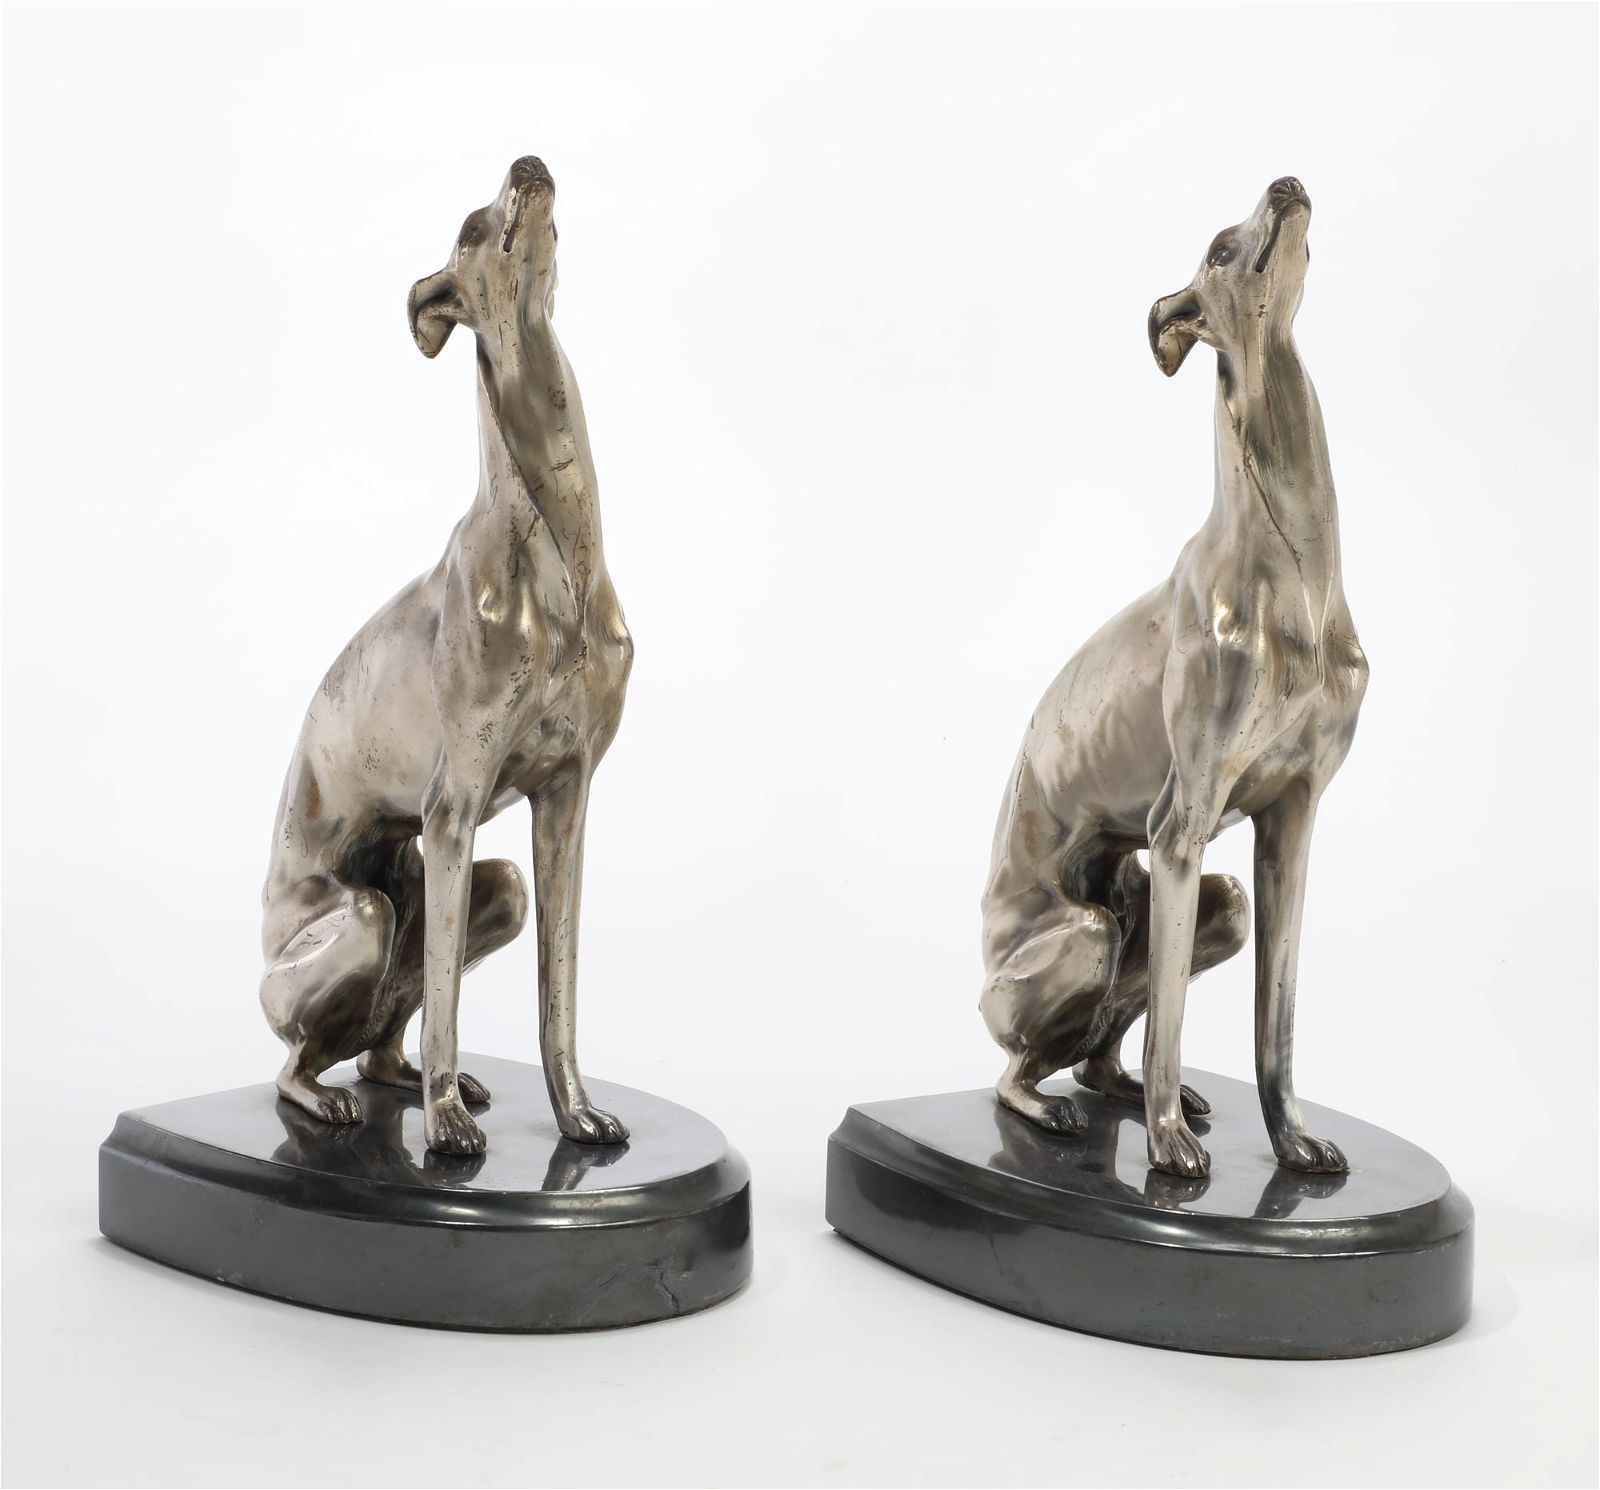 TWO GREYHOUND FORM BOOKENDSTwo 2fb34d4